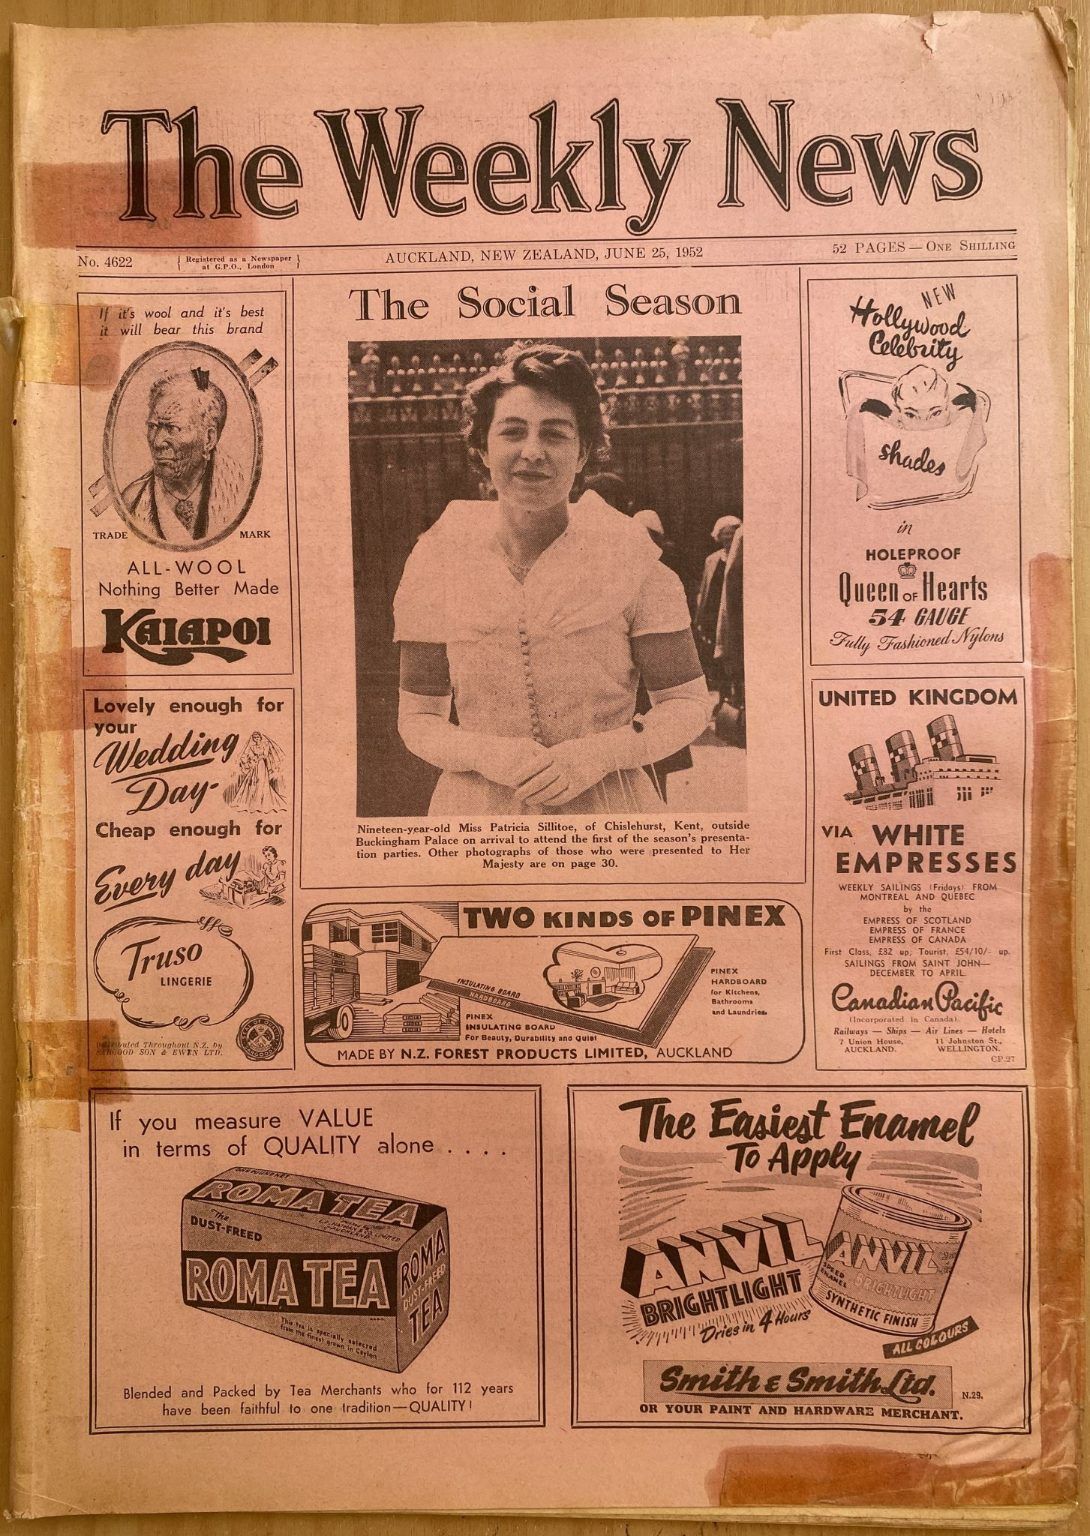 OLD NEWSPAPER: The Weekly News - No. 4622, 25 June 1952